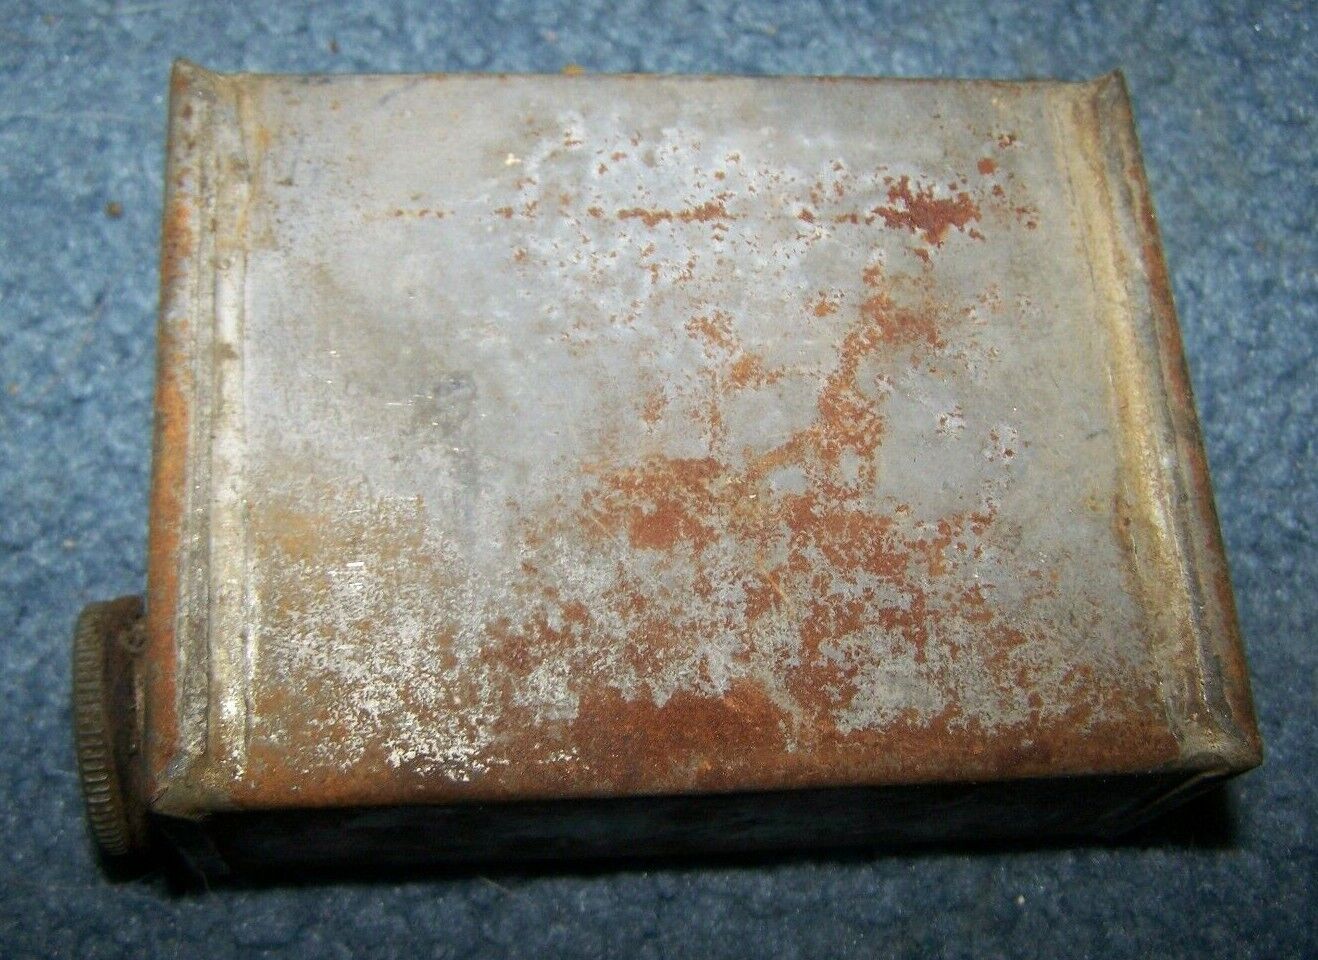 WW2 VICKERS / BREN MG OIL CAN WITH BRUSH, BRITISH ISSUE *NICE*     